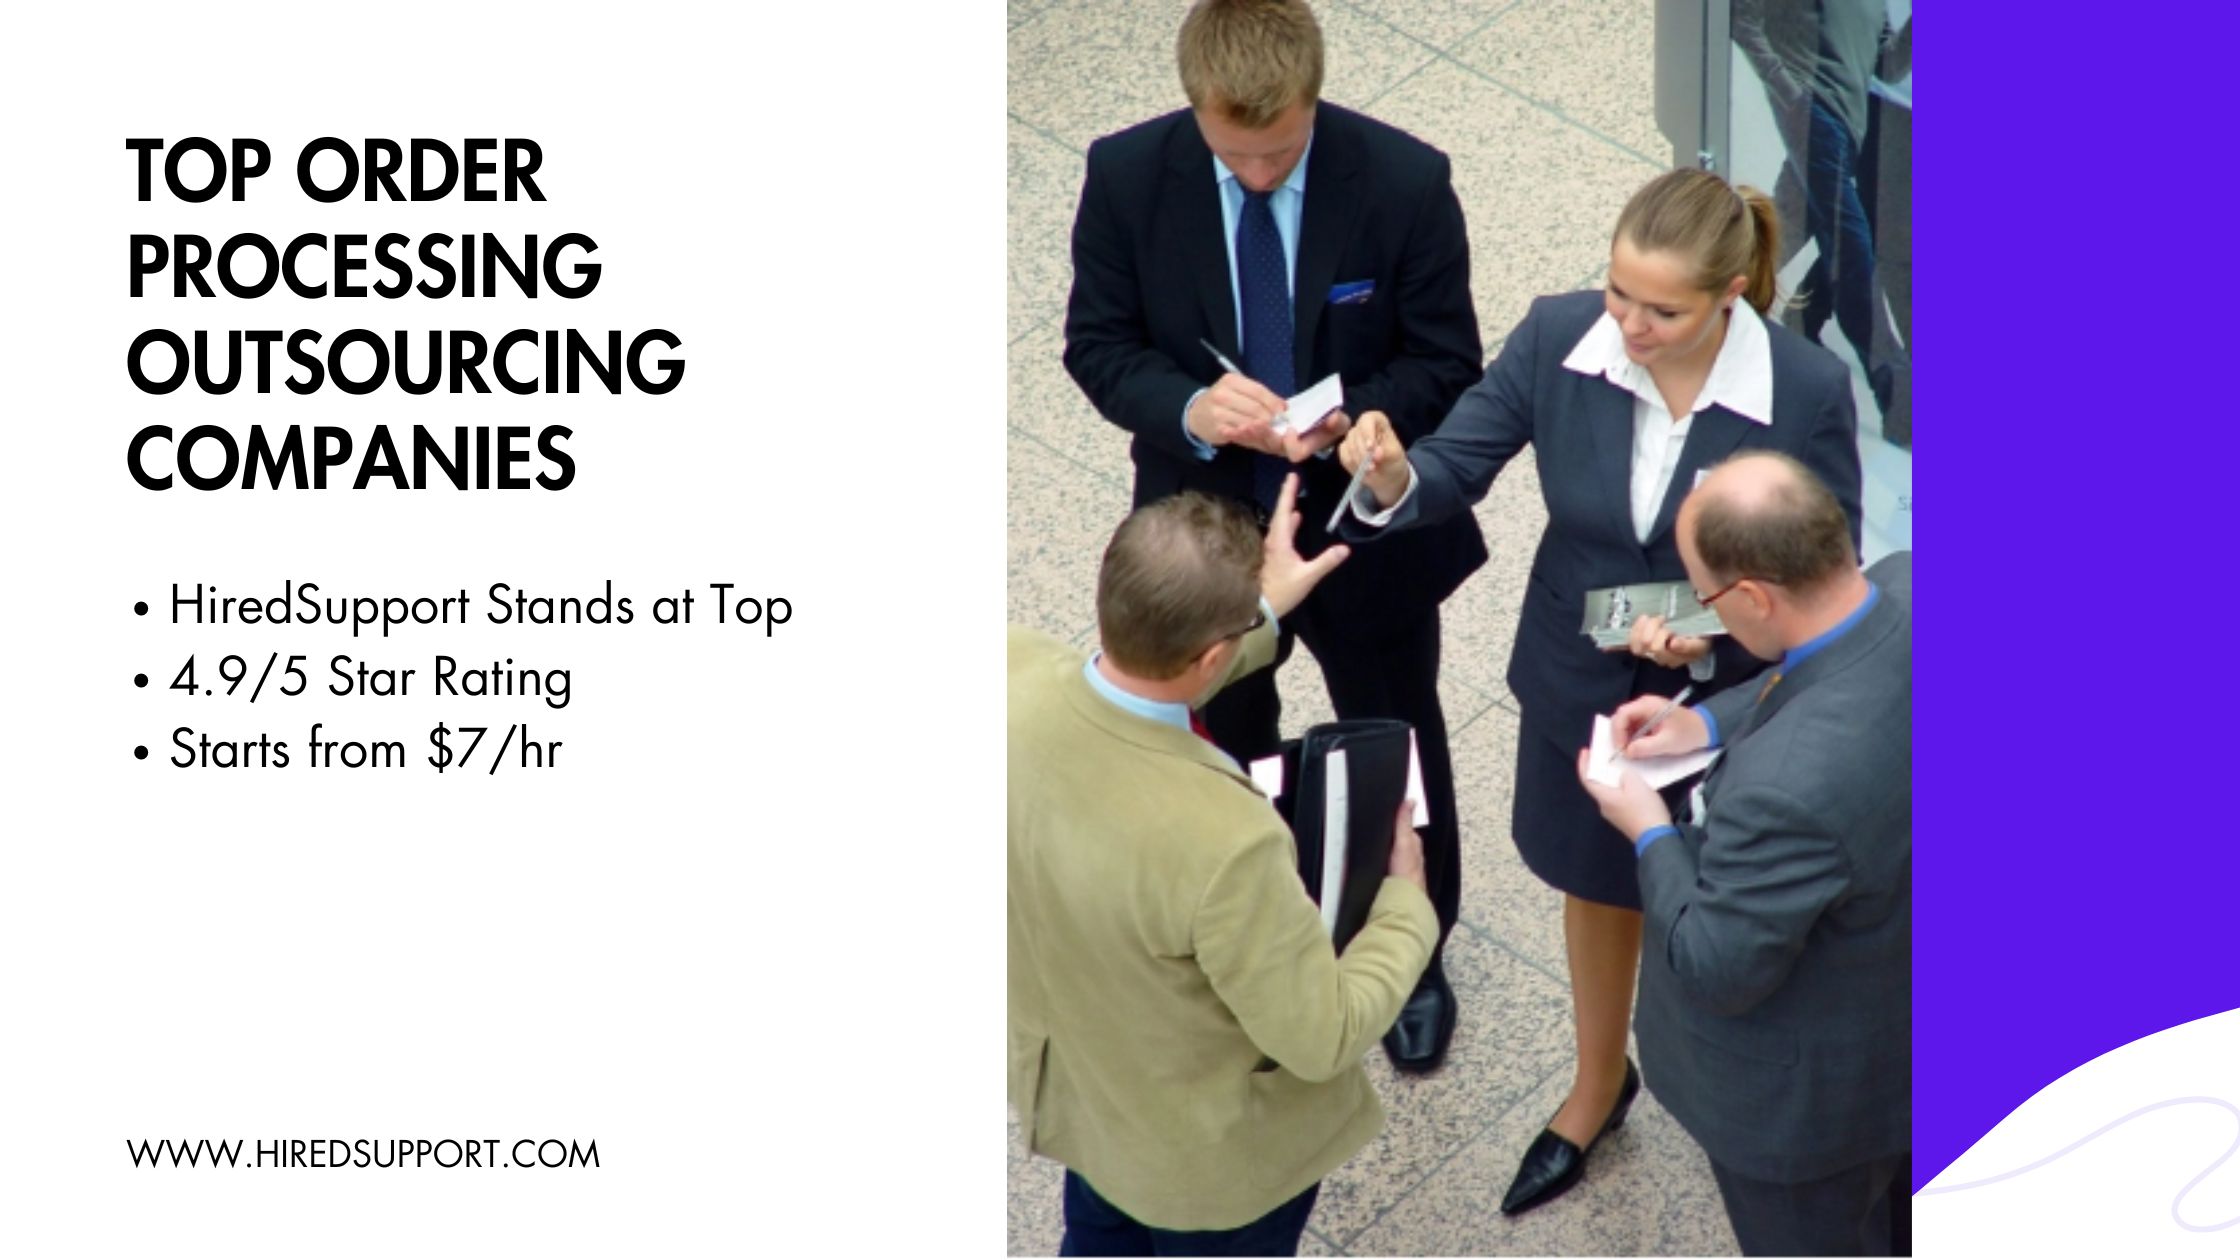 Top Order processing Outsourcing Companies